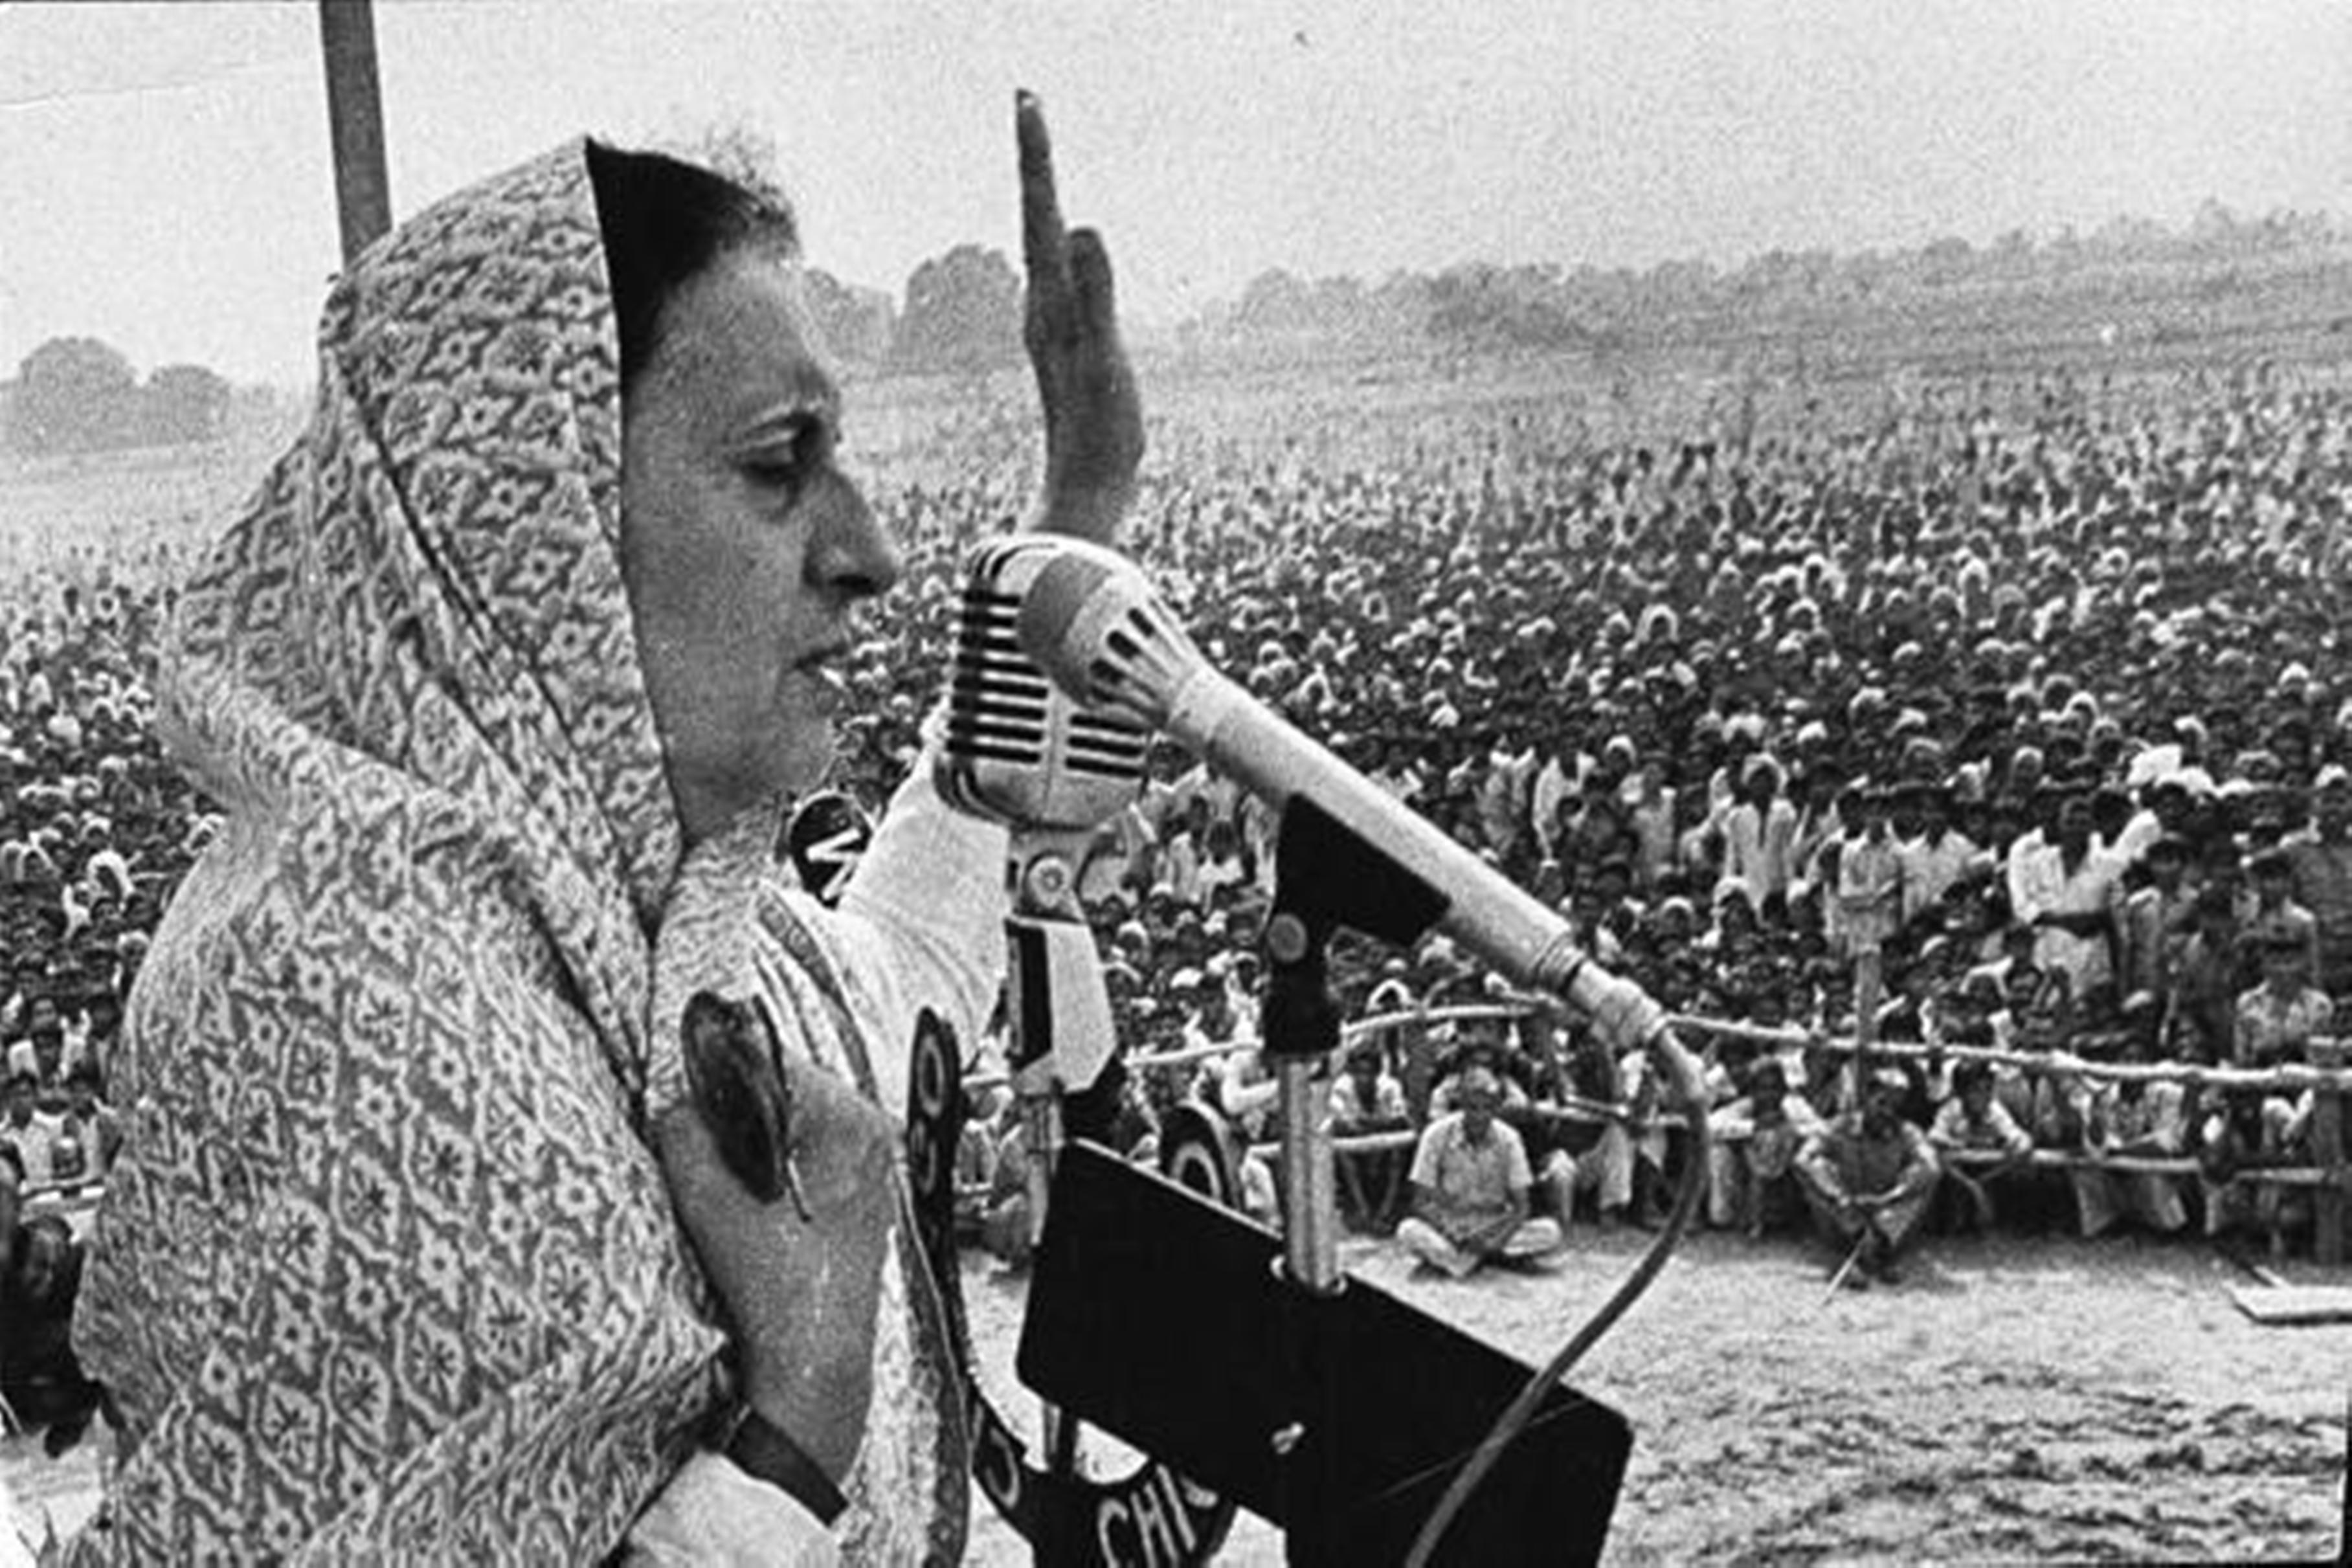 when indira gandhi addressed rally in phool bagh kanpur